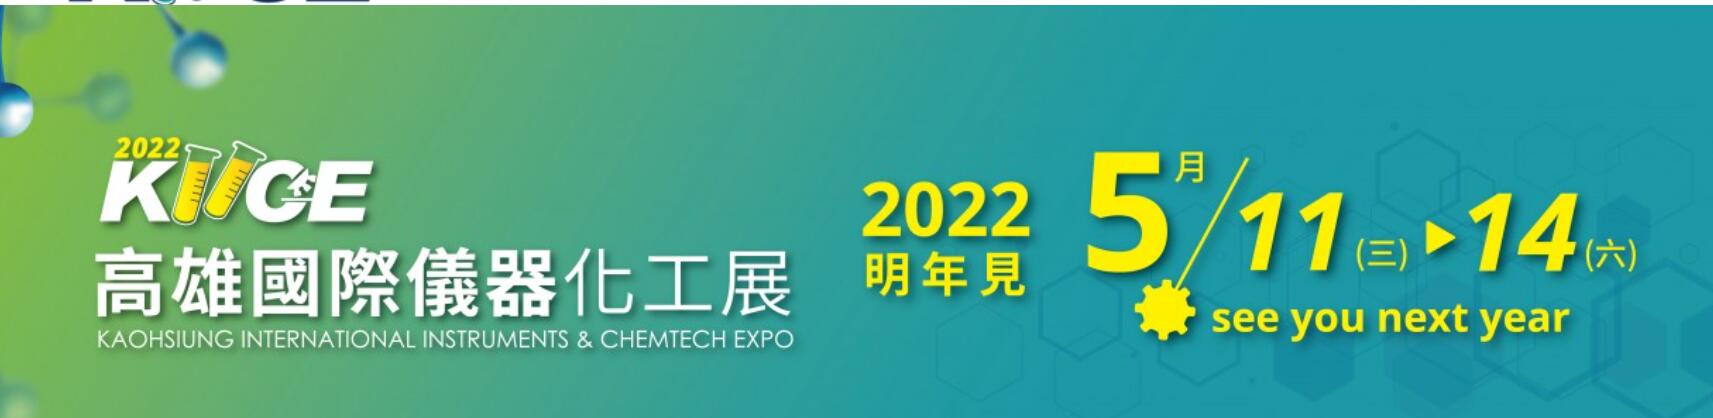 2022 KAOHSIUNG INTERNATIONAL INSTRUMENTS & CHEMTECH EXPO